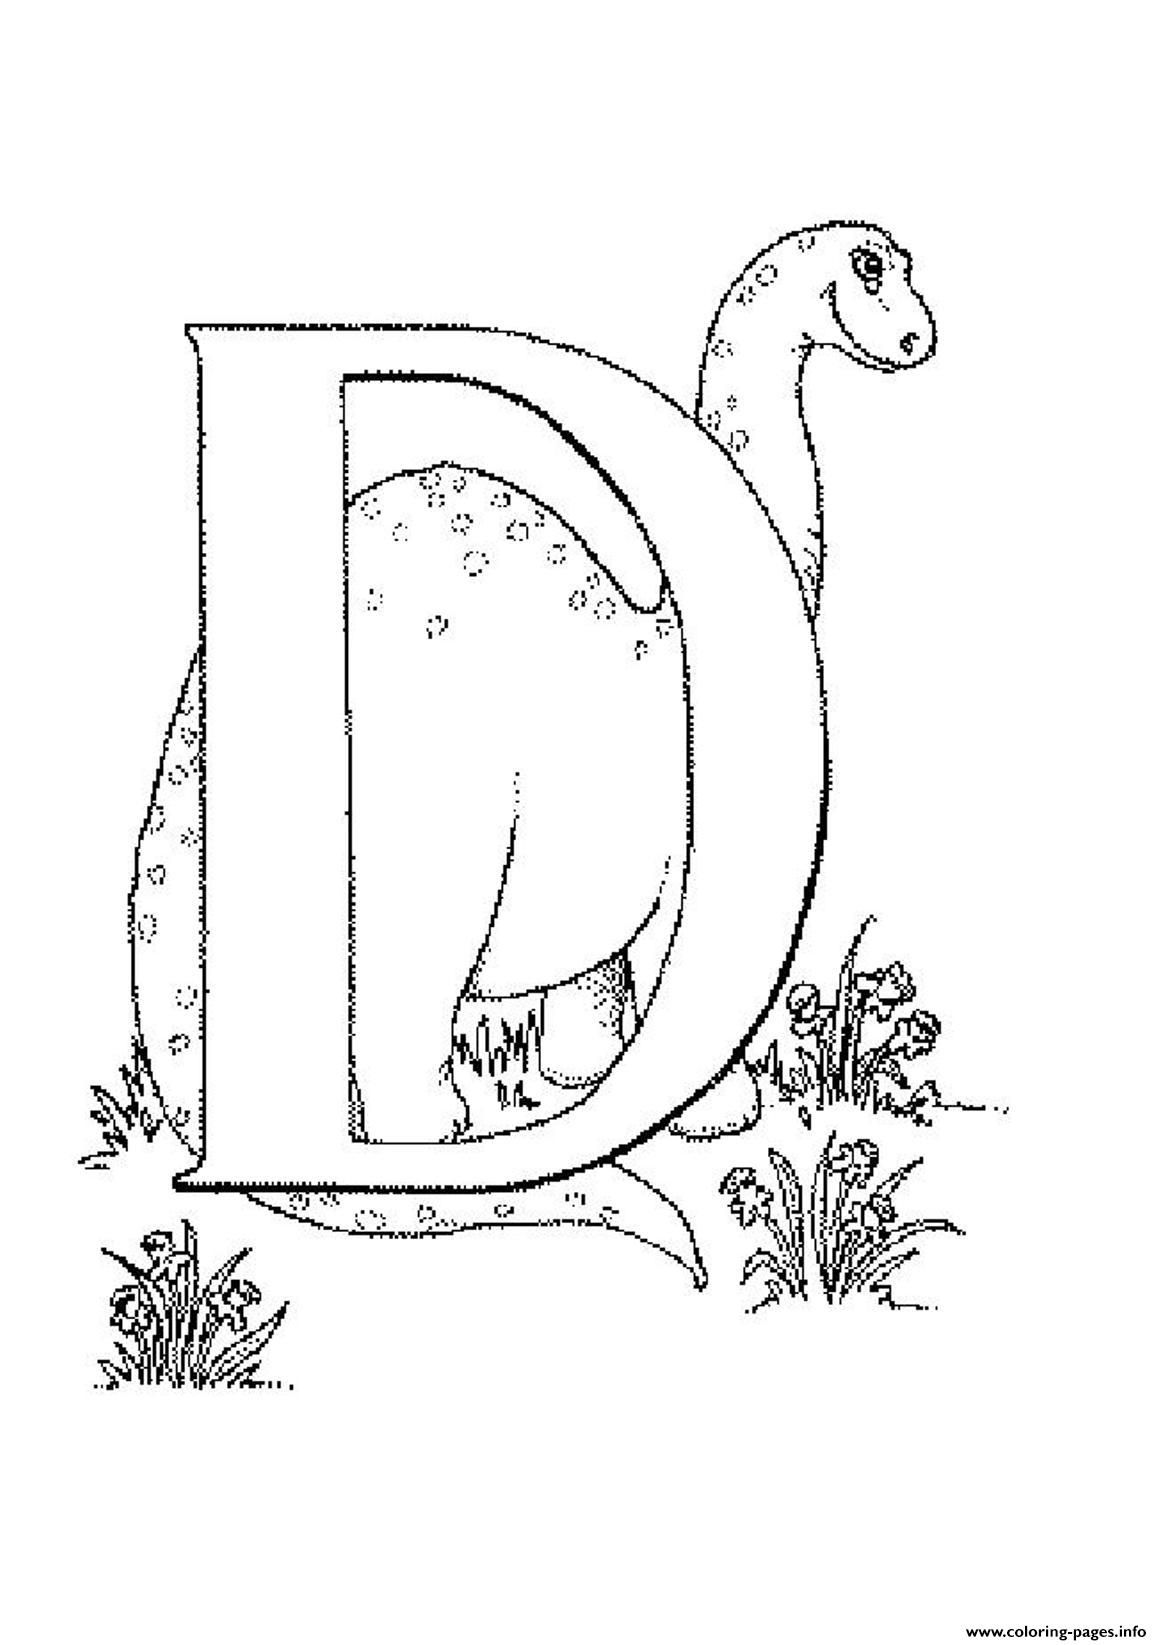 Printable Alphabet S D For Dino066c Coloring Pages Printable